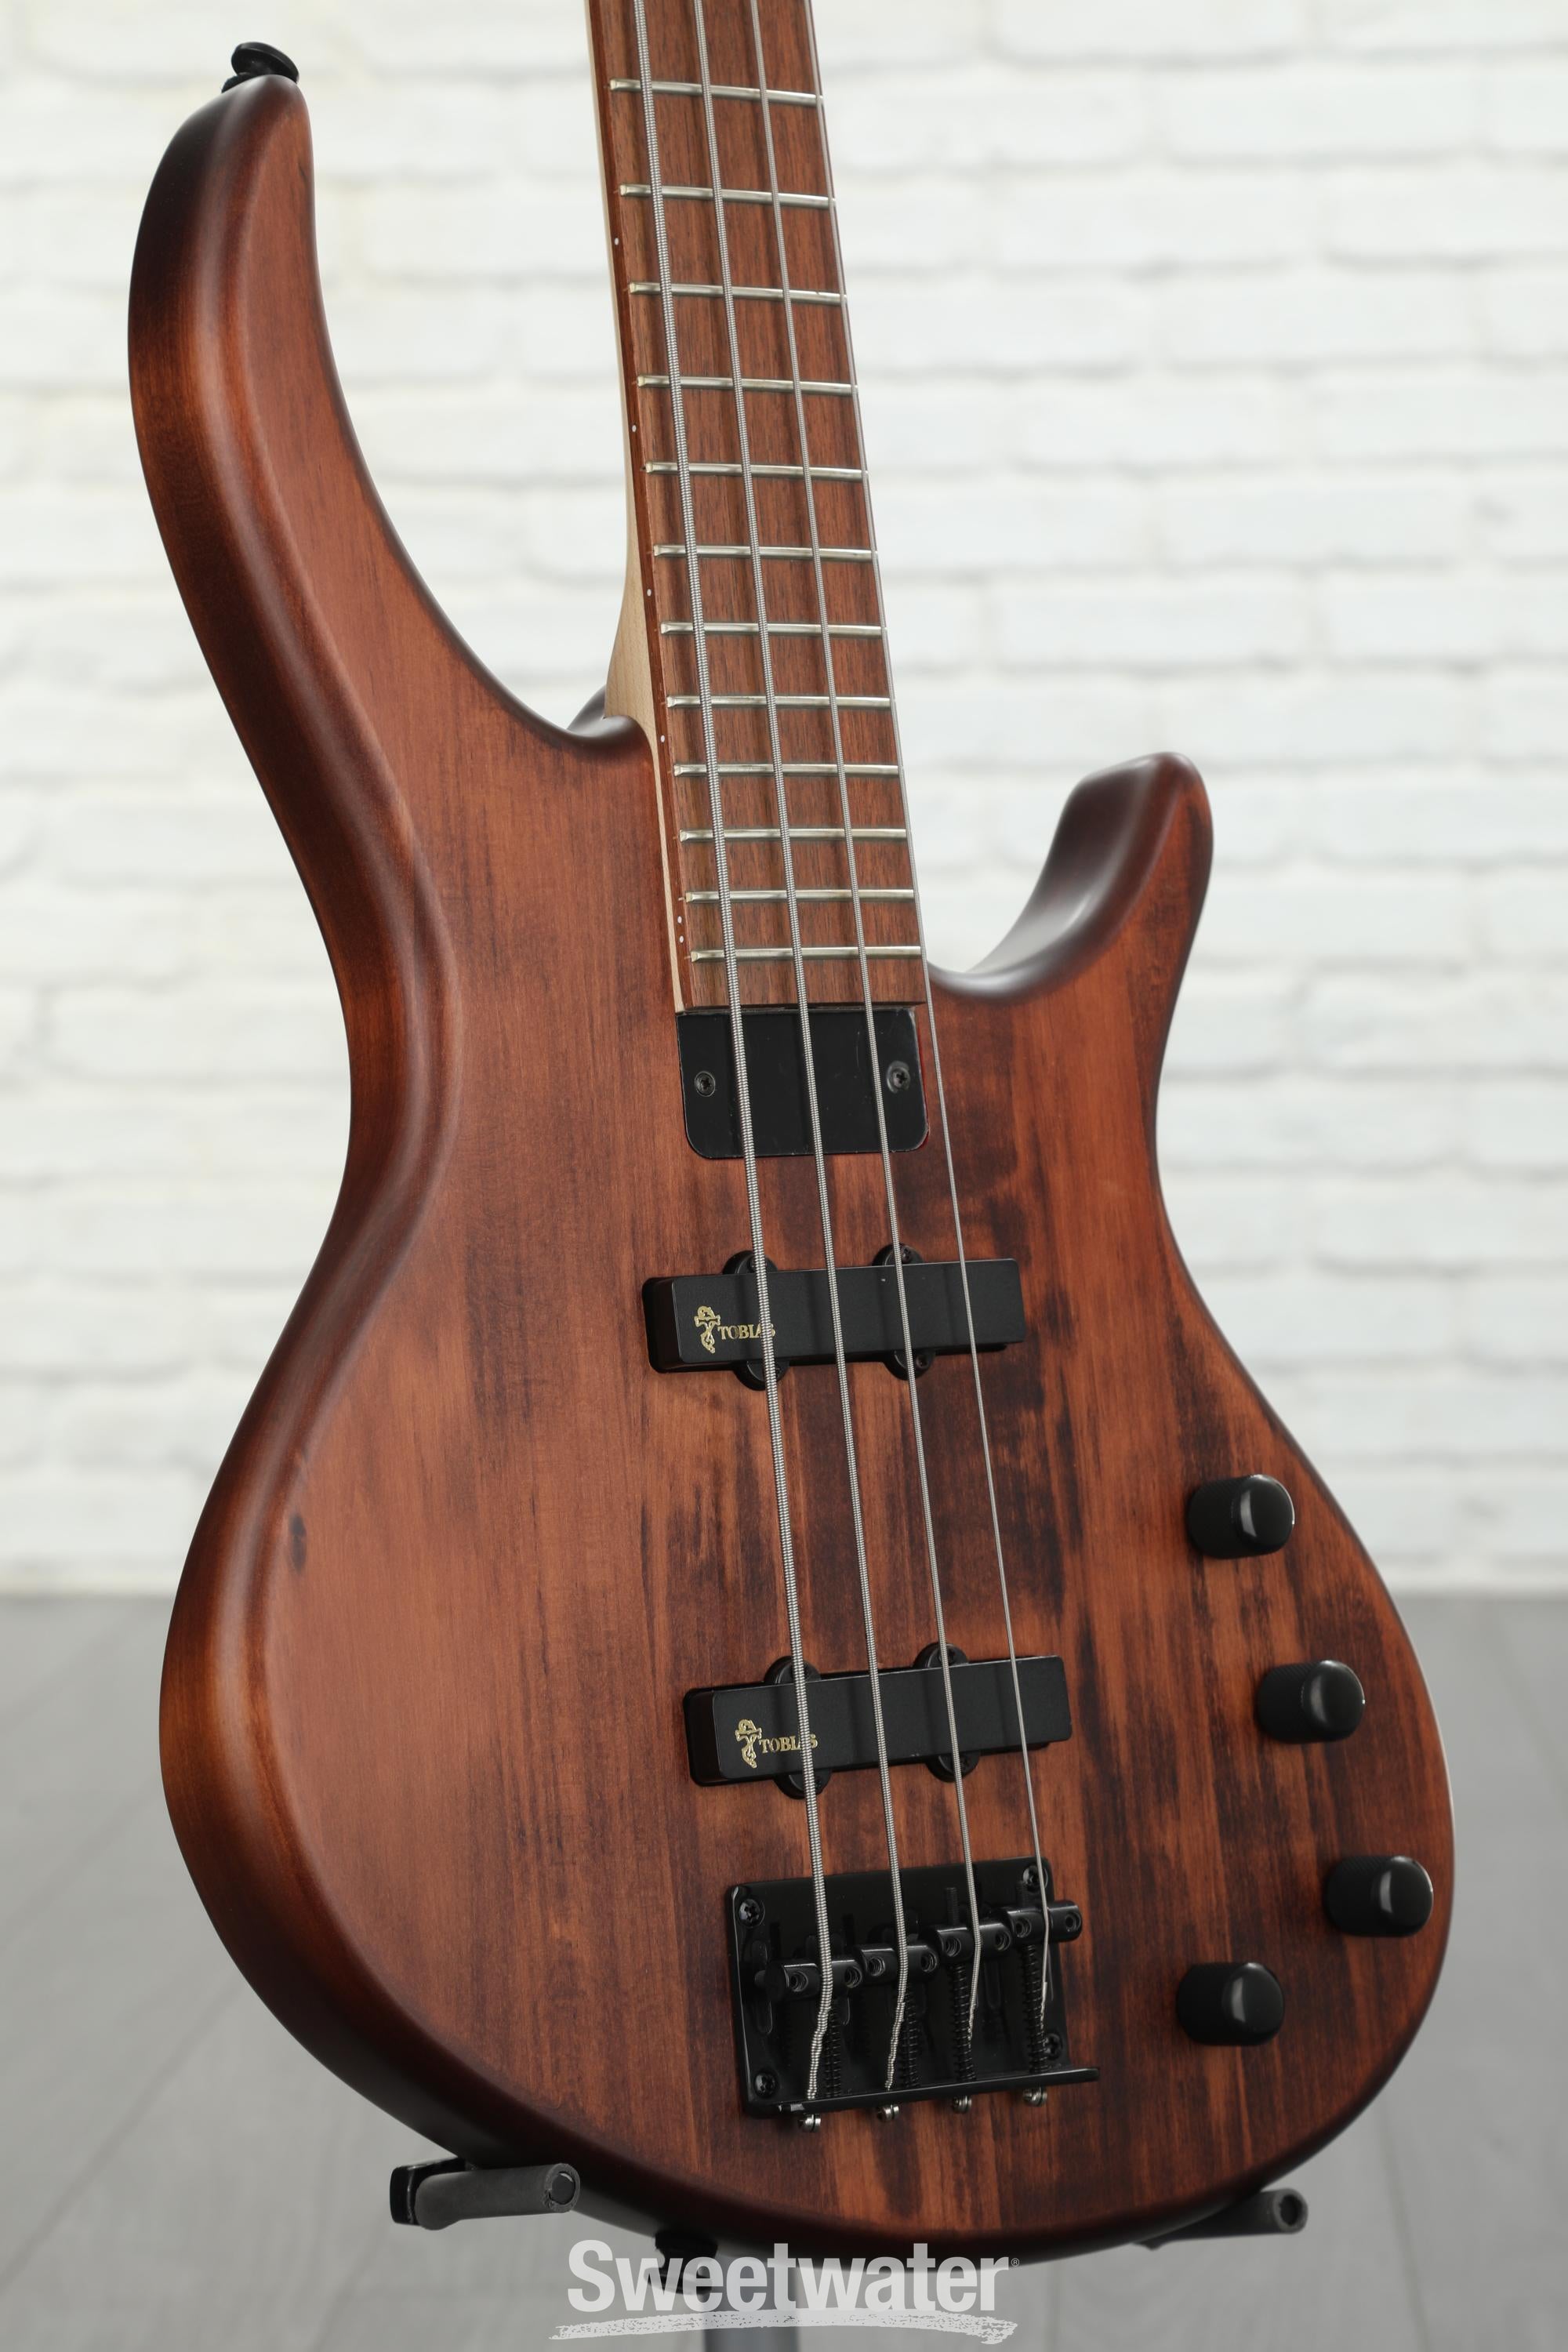 Toby Deluxe IV Bass - Walnut | Sweetwater